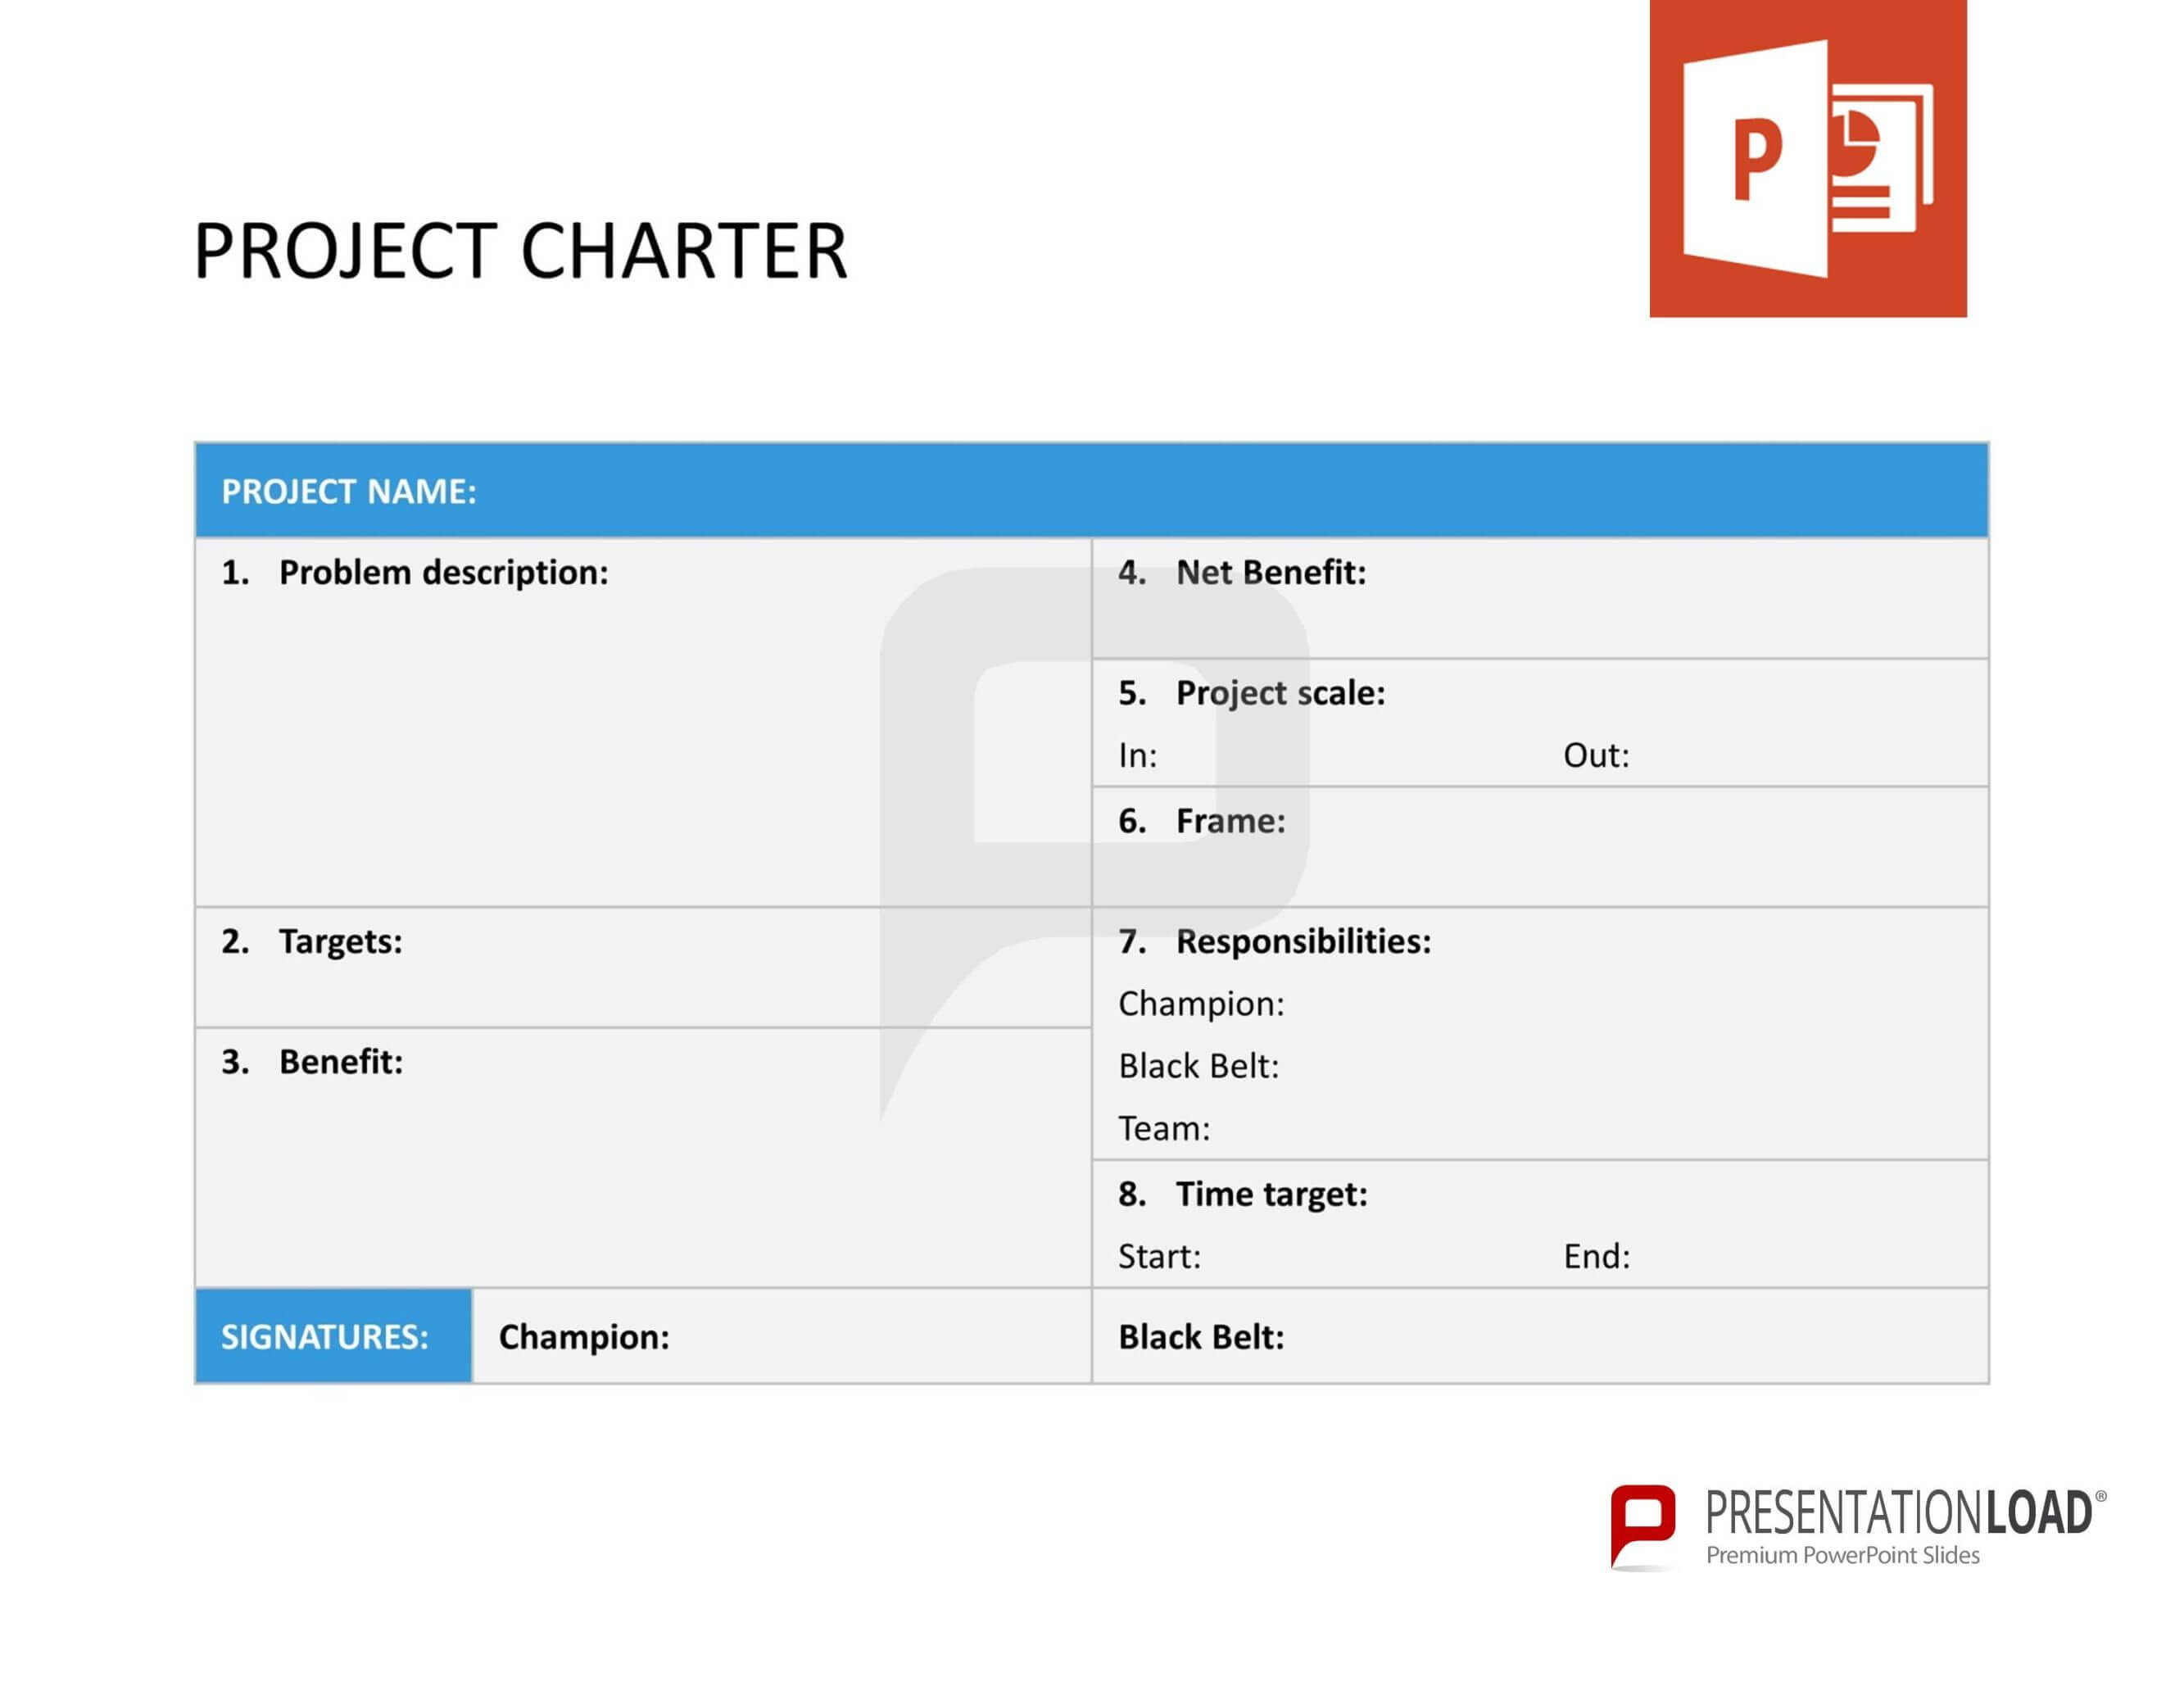 Pinpresentationload On Quality Management // Powerpoint Within Team Charter Template Powerpoint